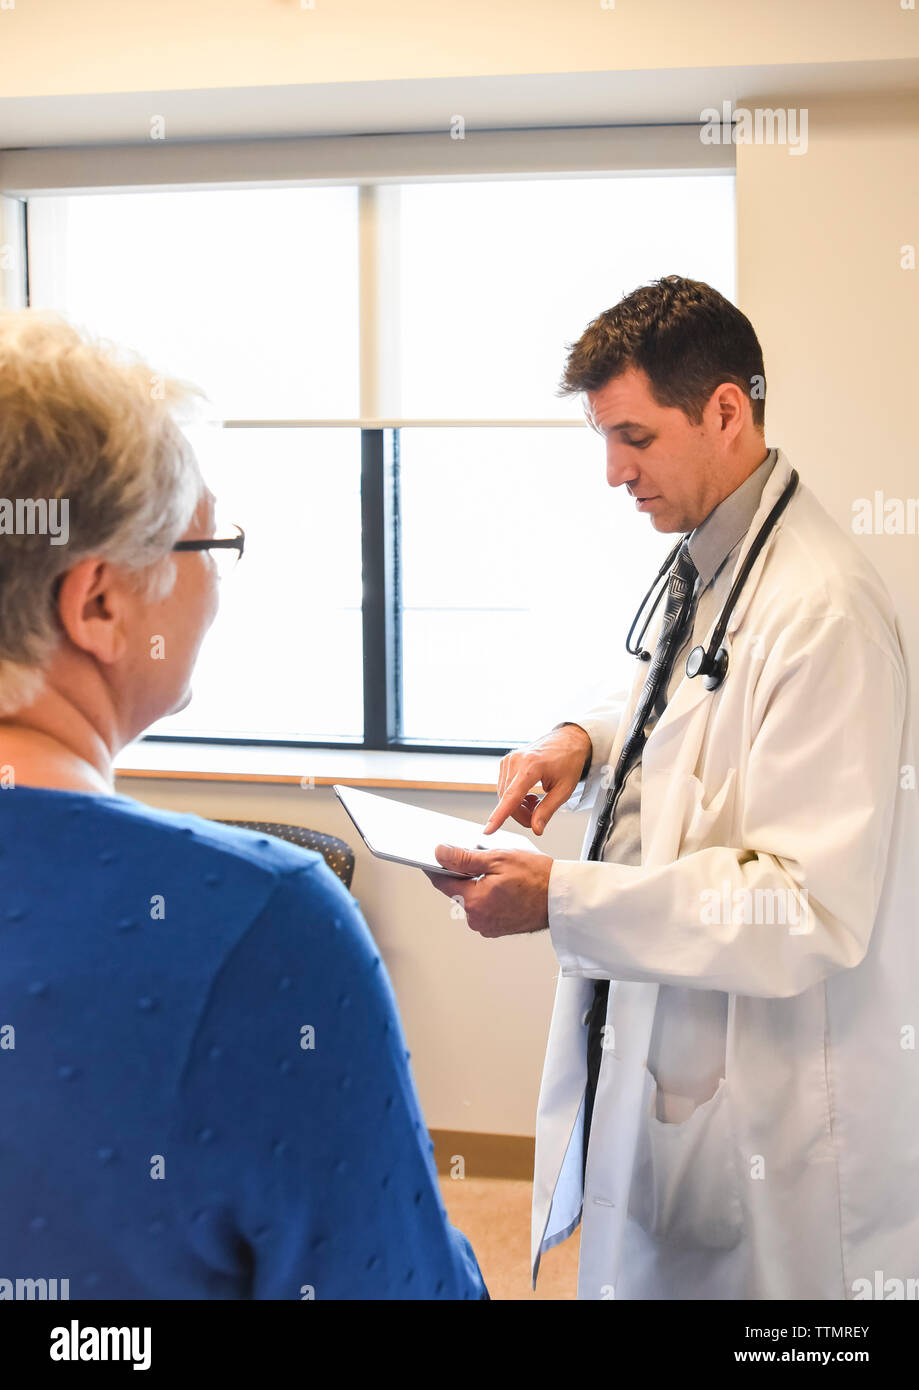 Doctor holding tablet speaking to older patient in a clinical setting. Stock Photo